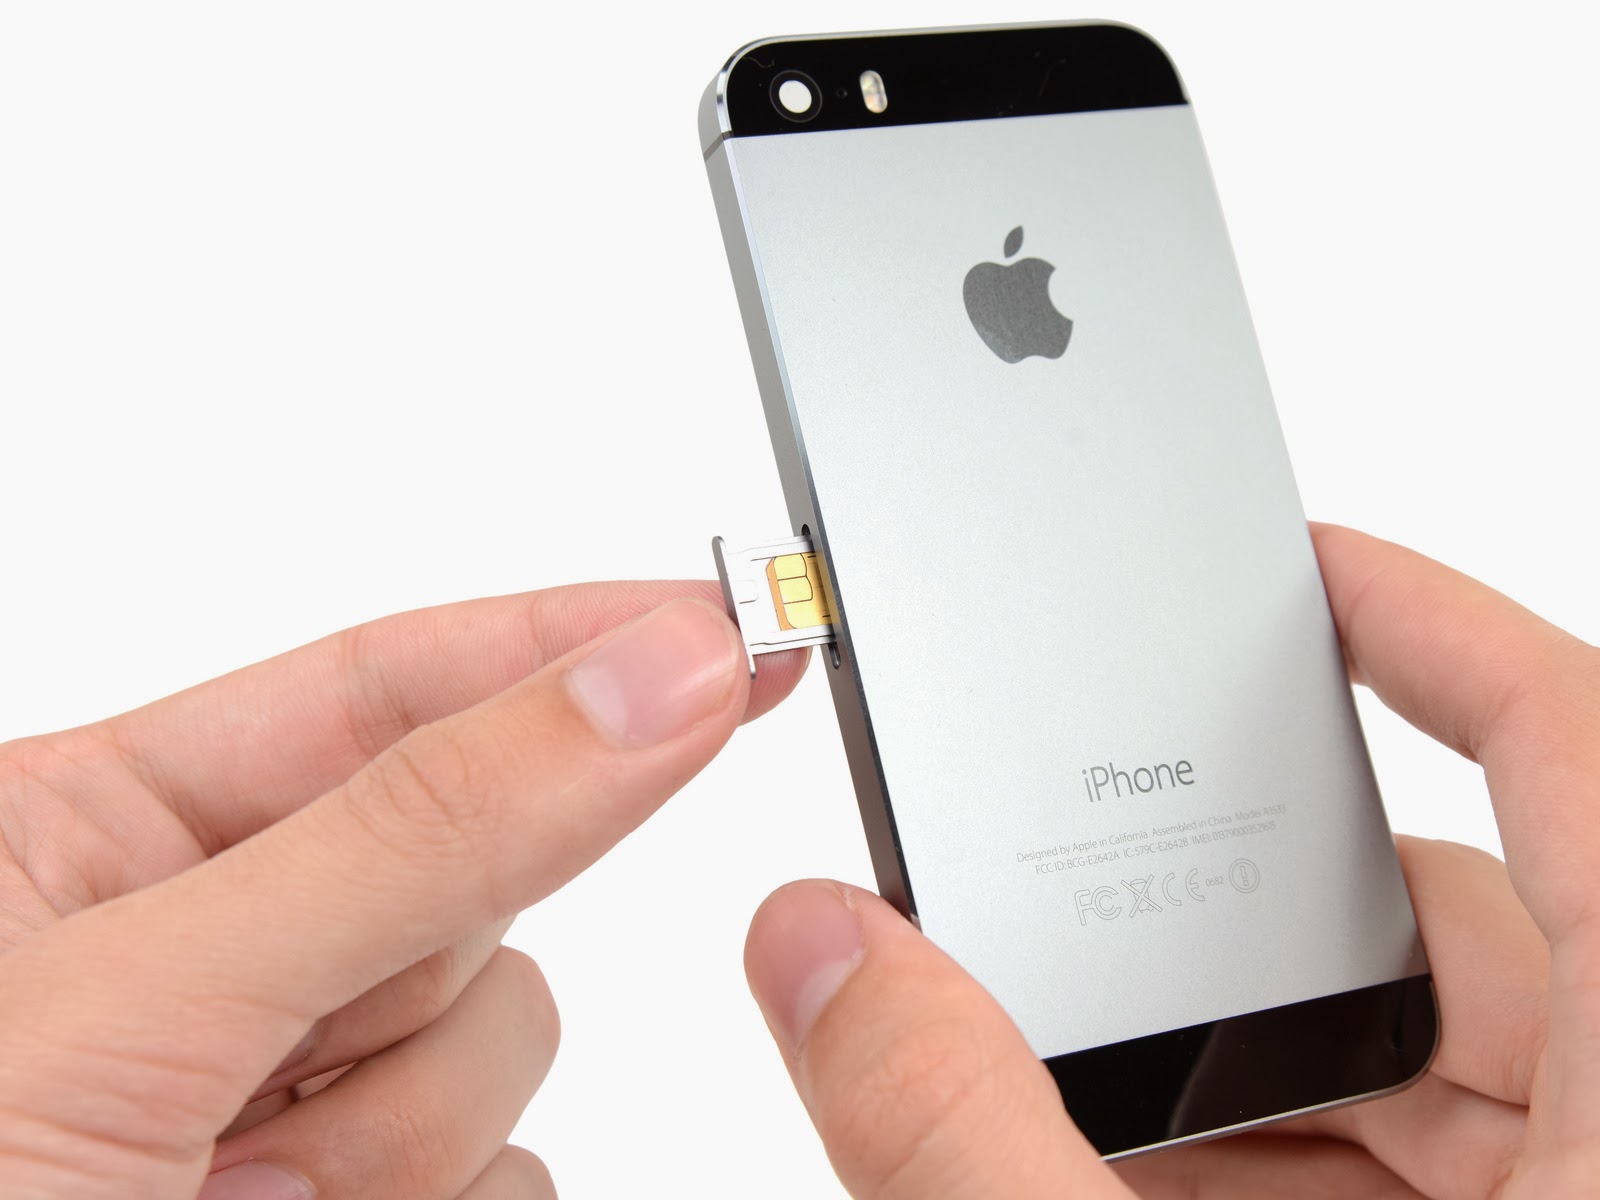 iPhone 5s SIM Card Replacement